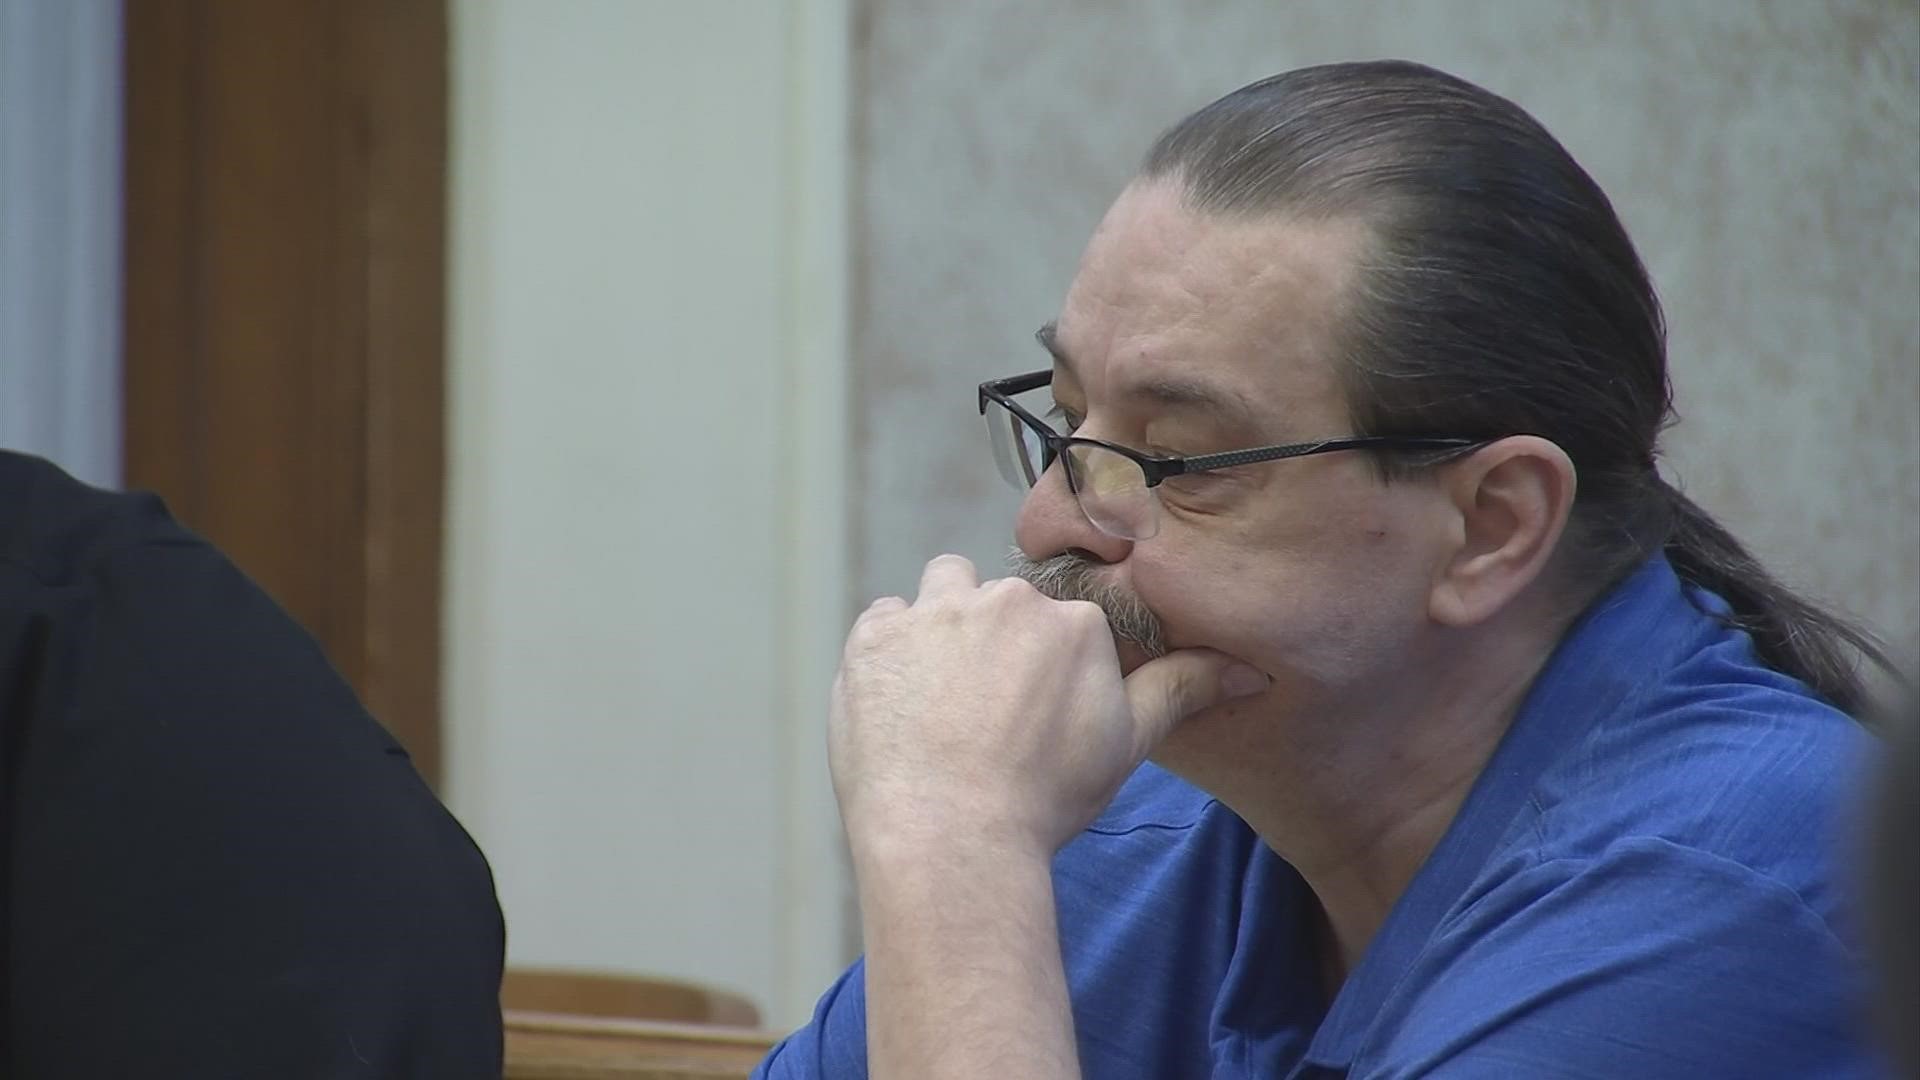 Prosecutors say Charles Castle took the girl from her home, held her in his RV, and bound and trapped her in a closet when her father showed up to ask about her.